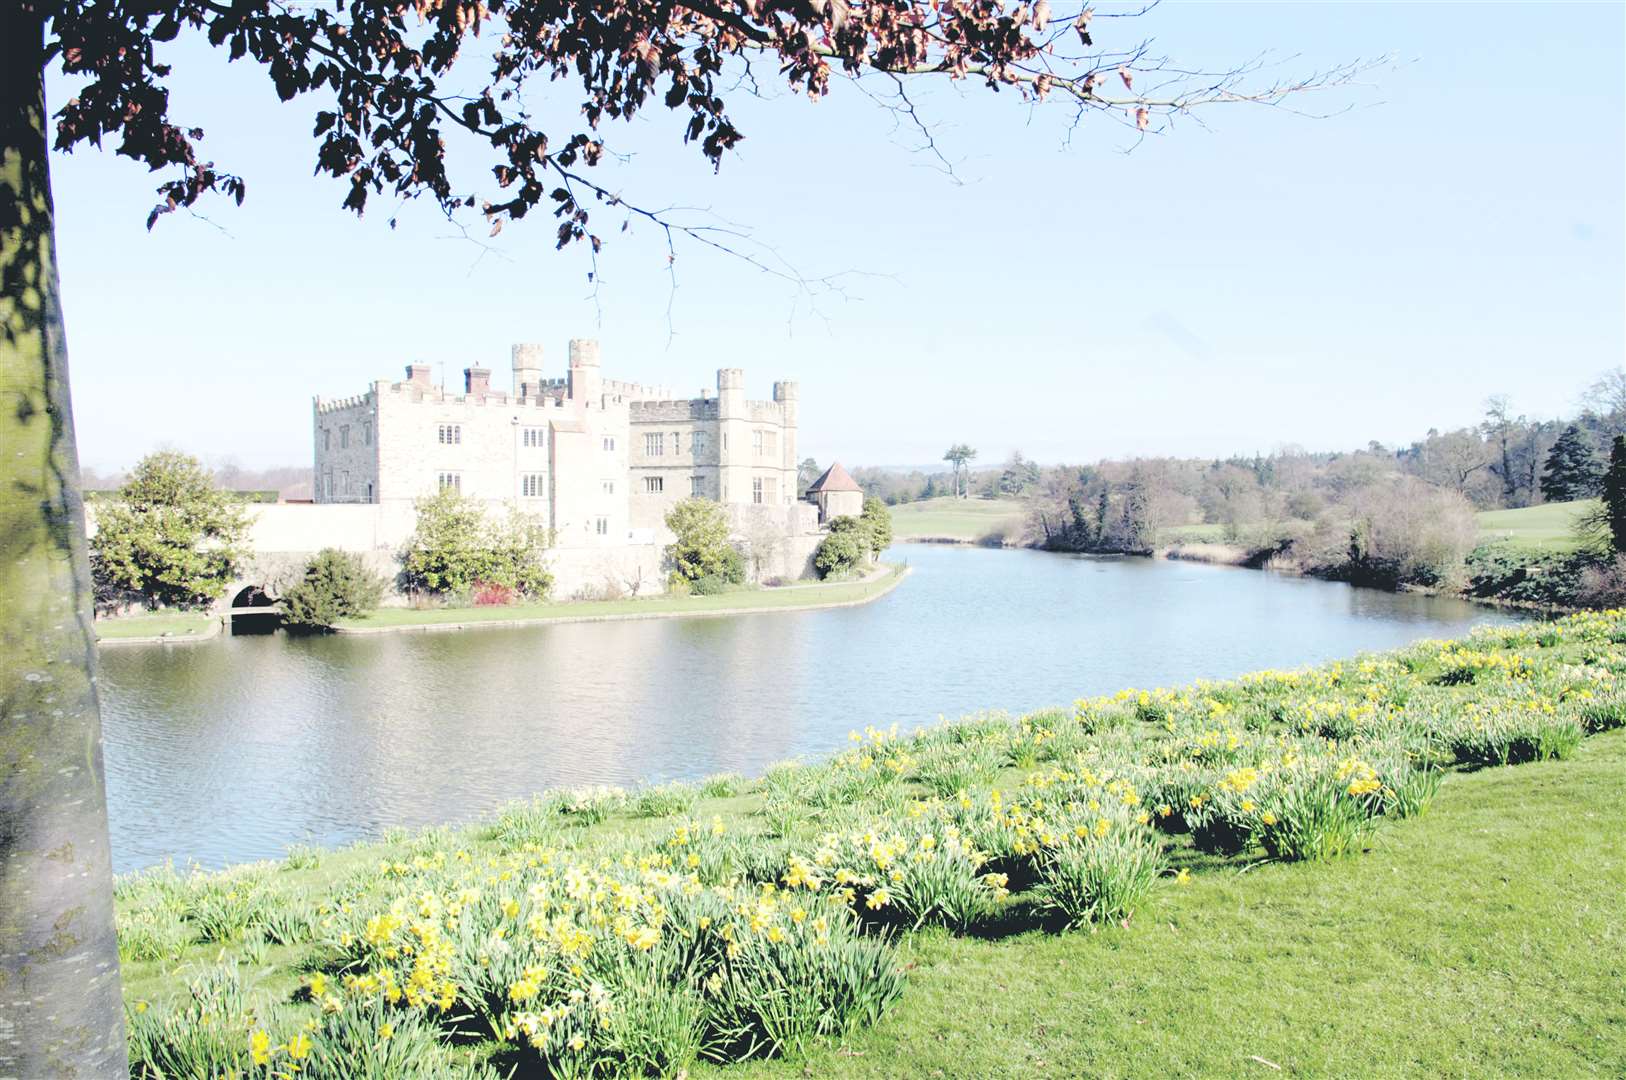 Leeds Castle has struggled to make ends meet since the lockdown dramatically reduced visitor numbers